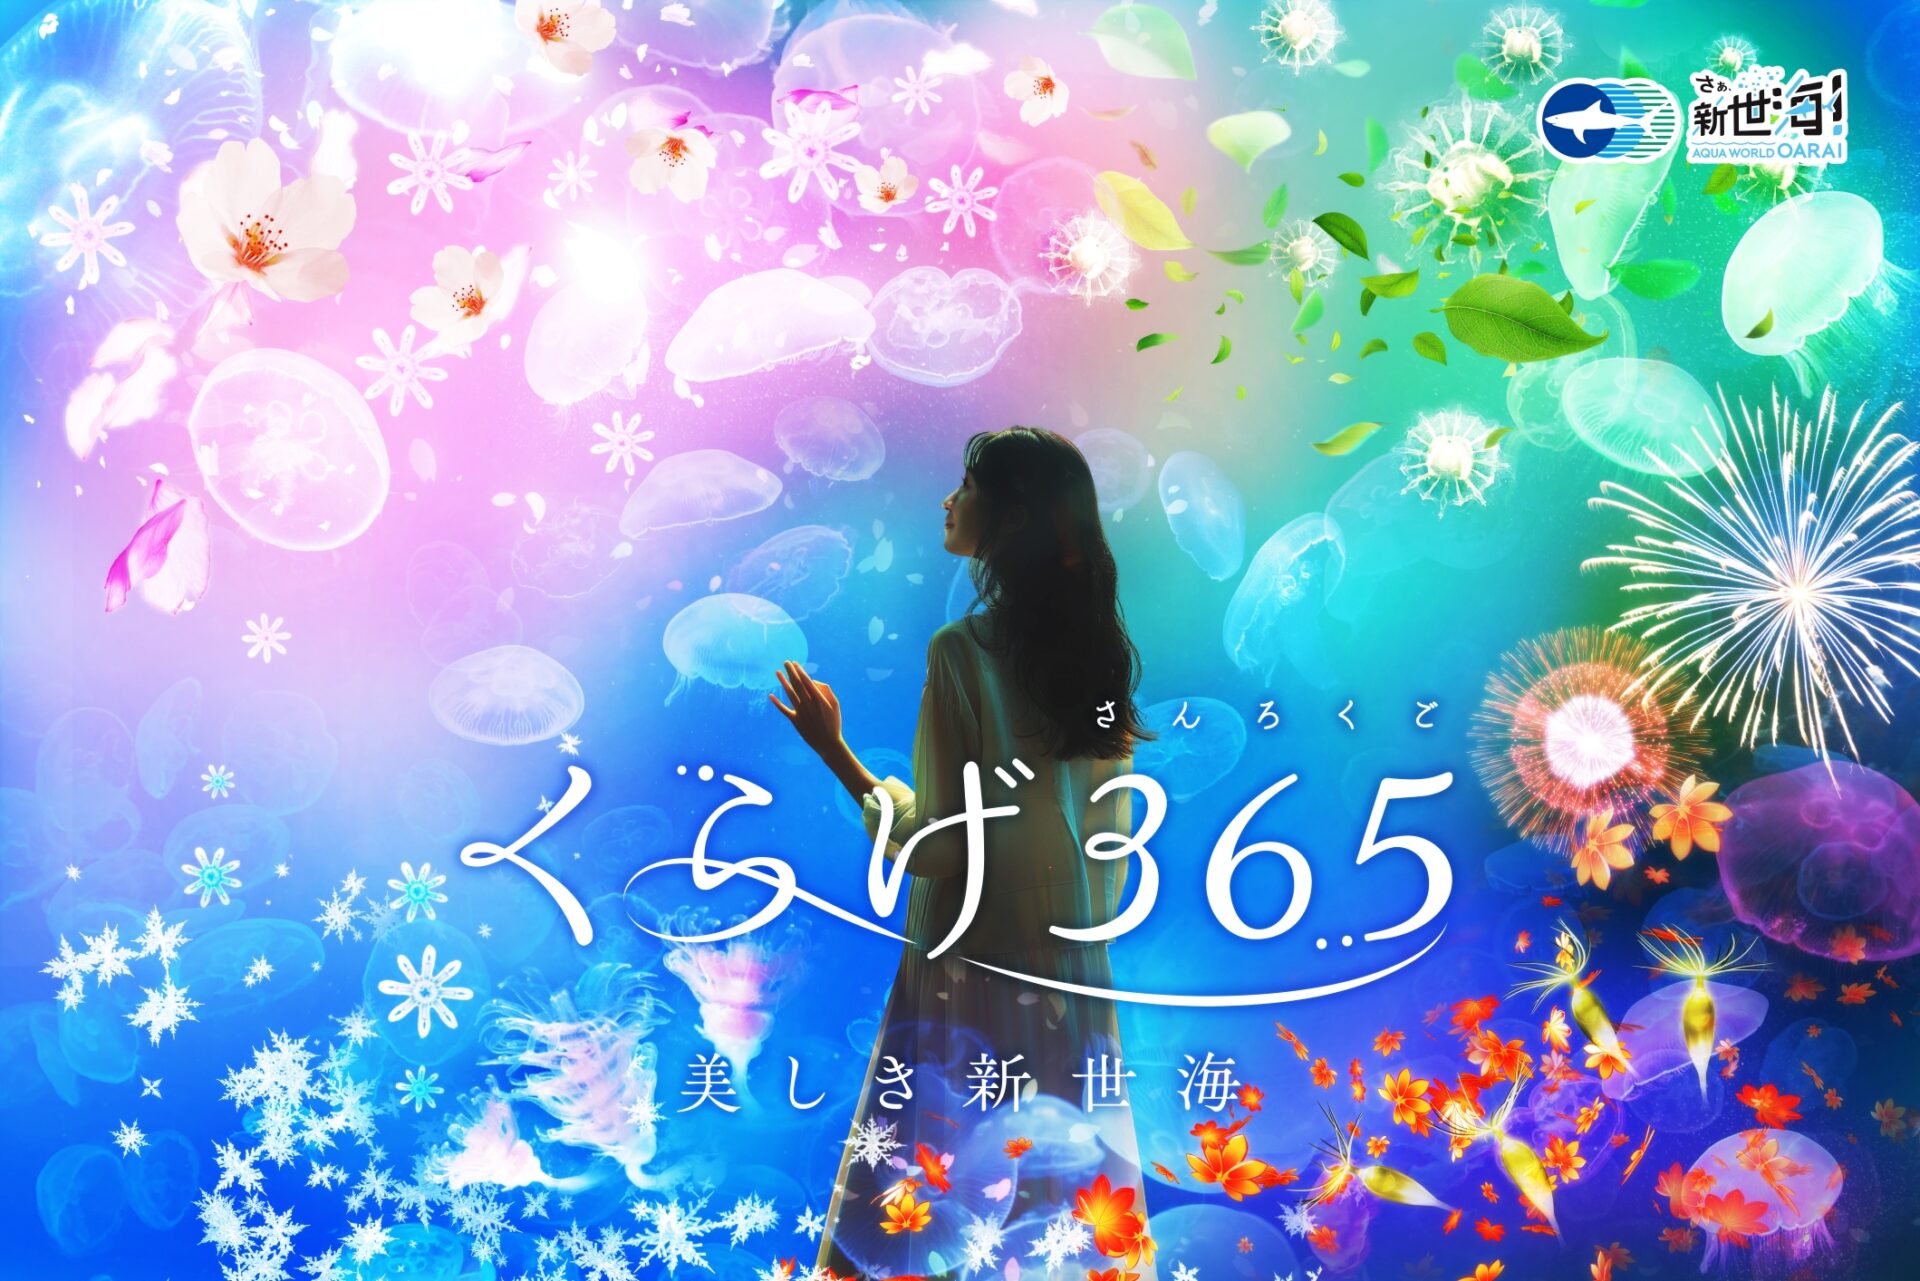 Large jellyfish tank “Jellyfish 365” reopens on March 3th!